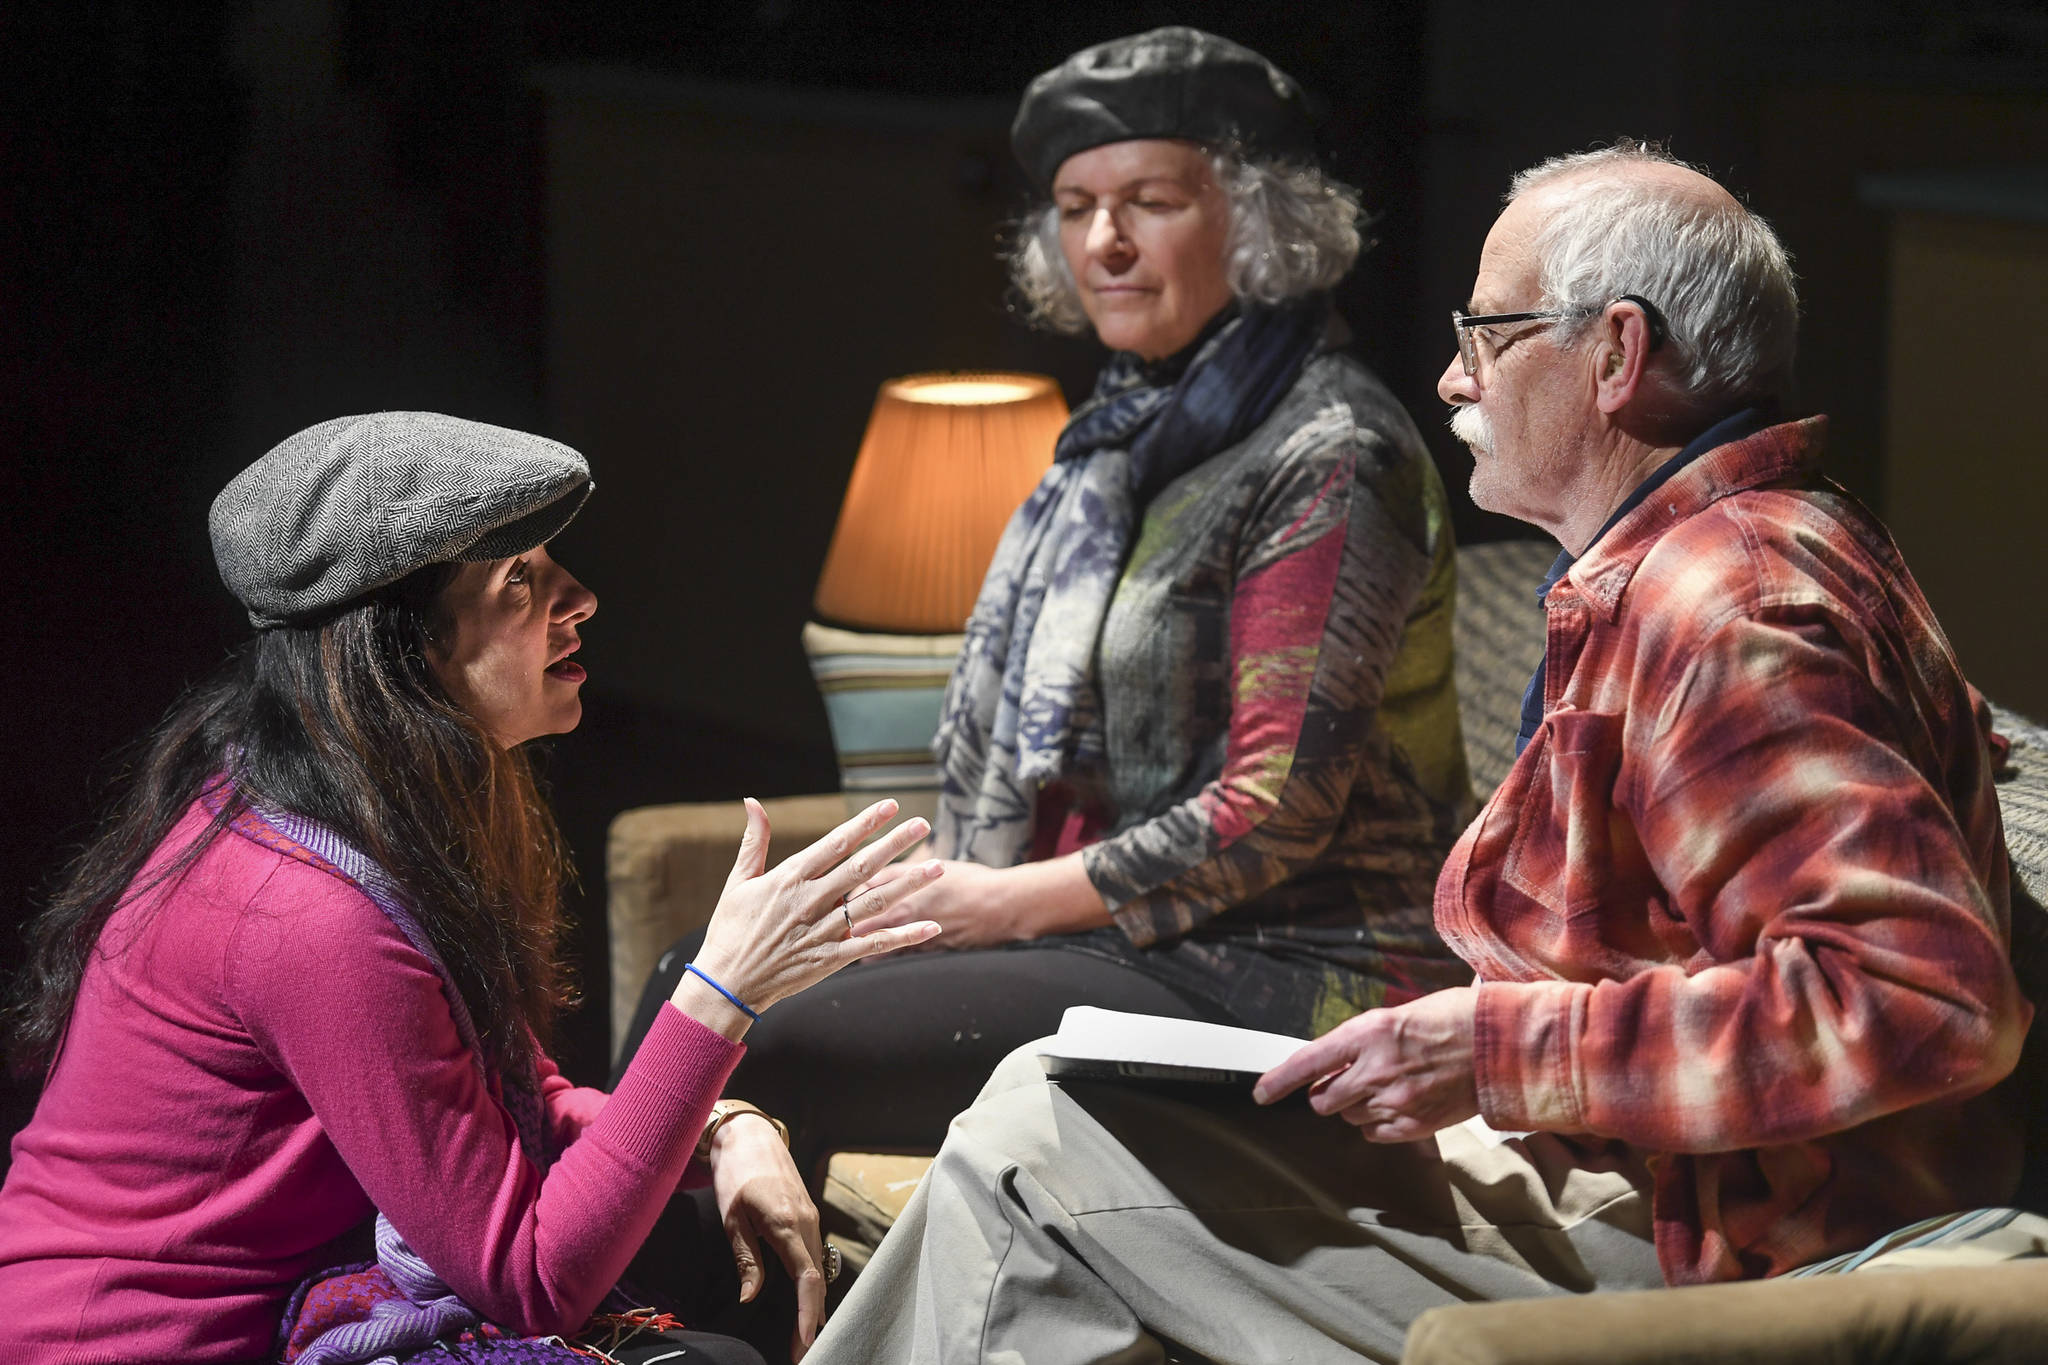 Director Alicia Dhyana House, left, speaks with Charlie Cardwell, playing Clifford, Angelina Fiordellisi, playing Minnie, as they rehearse in Perseverance Theatre’s production of “With” by playwright Carter Lewis on Tuesday, Nov. 19, 2019. “With” opens Friday Nov. 22 and runs through Dec. 15. (Michael Penn | Juneau Empire)